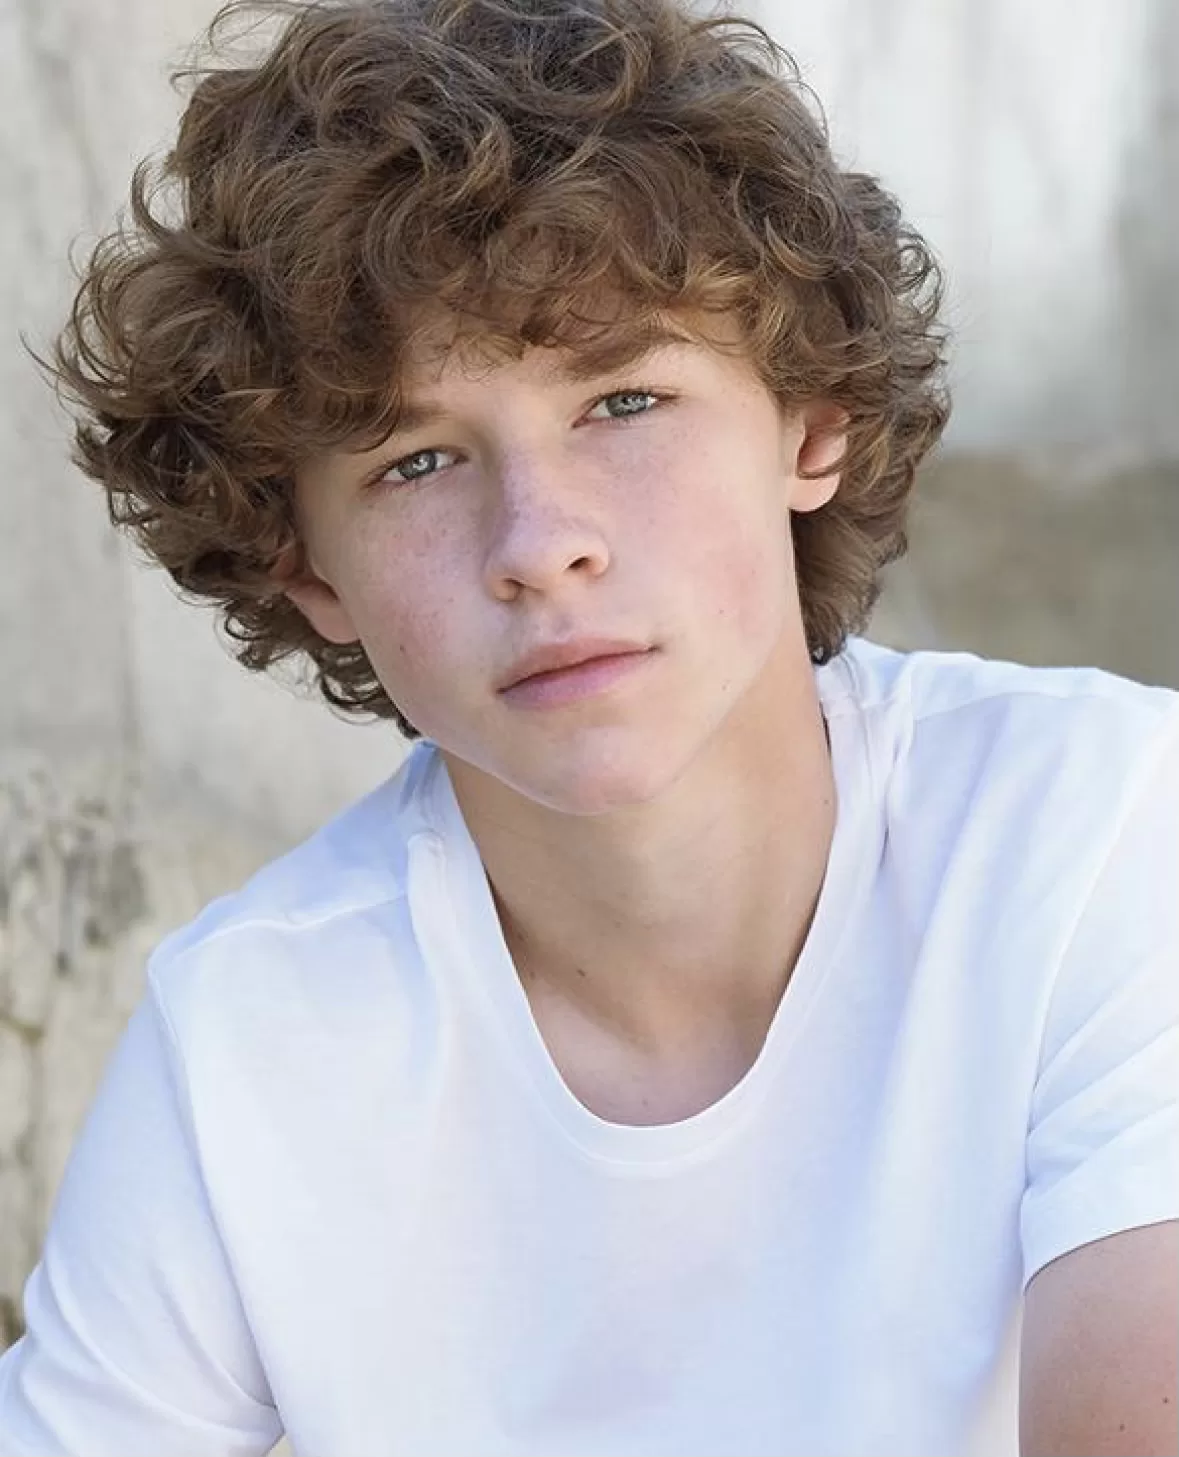  Dylan Hoffman: The Talented Young Actor and Athlete Making Waves in TV and Film